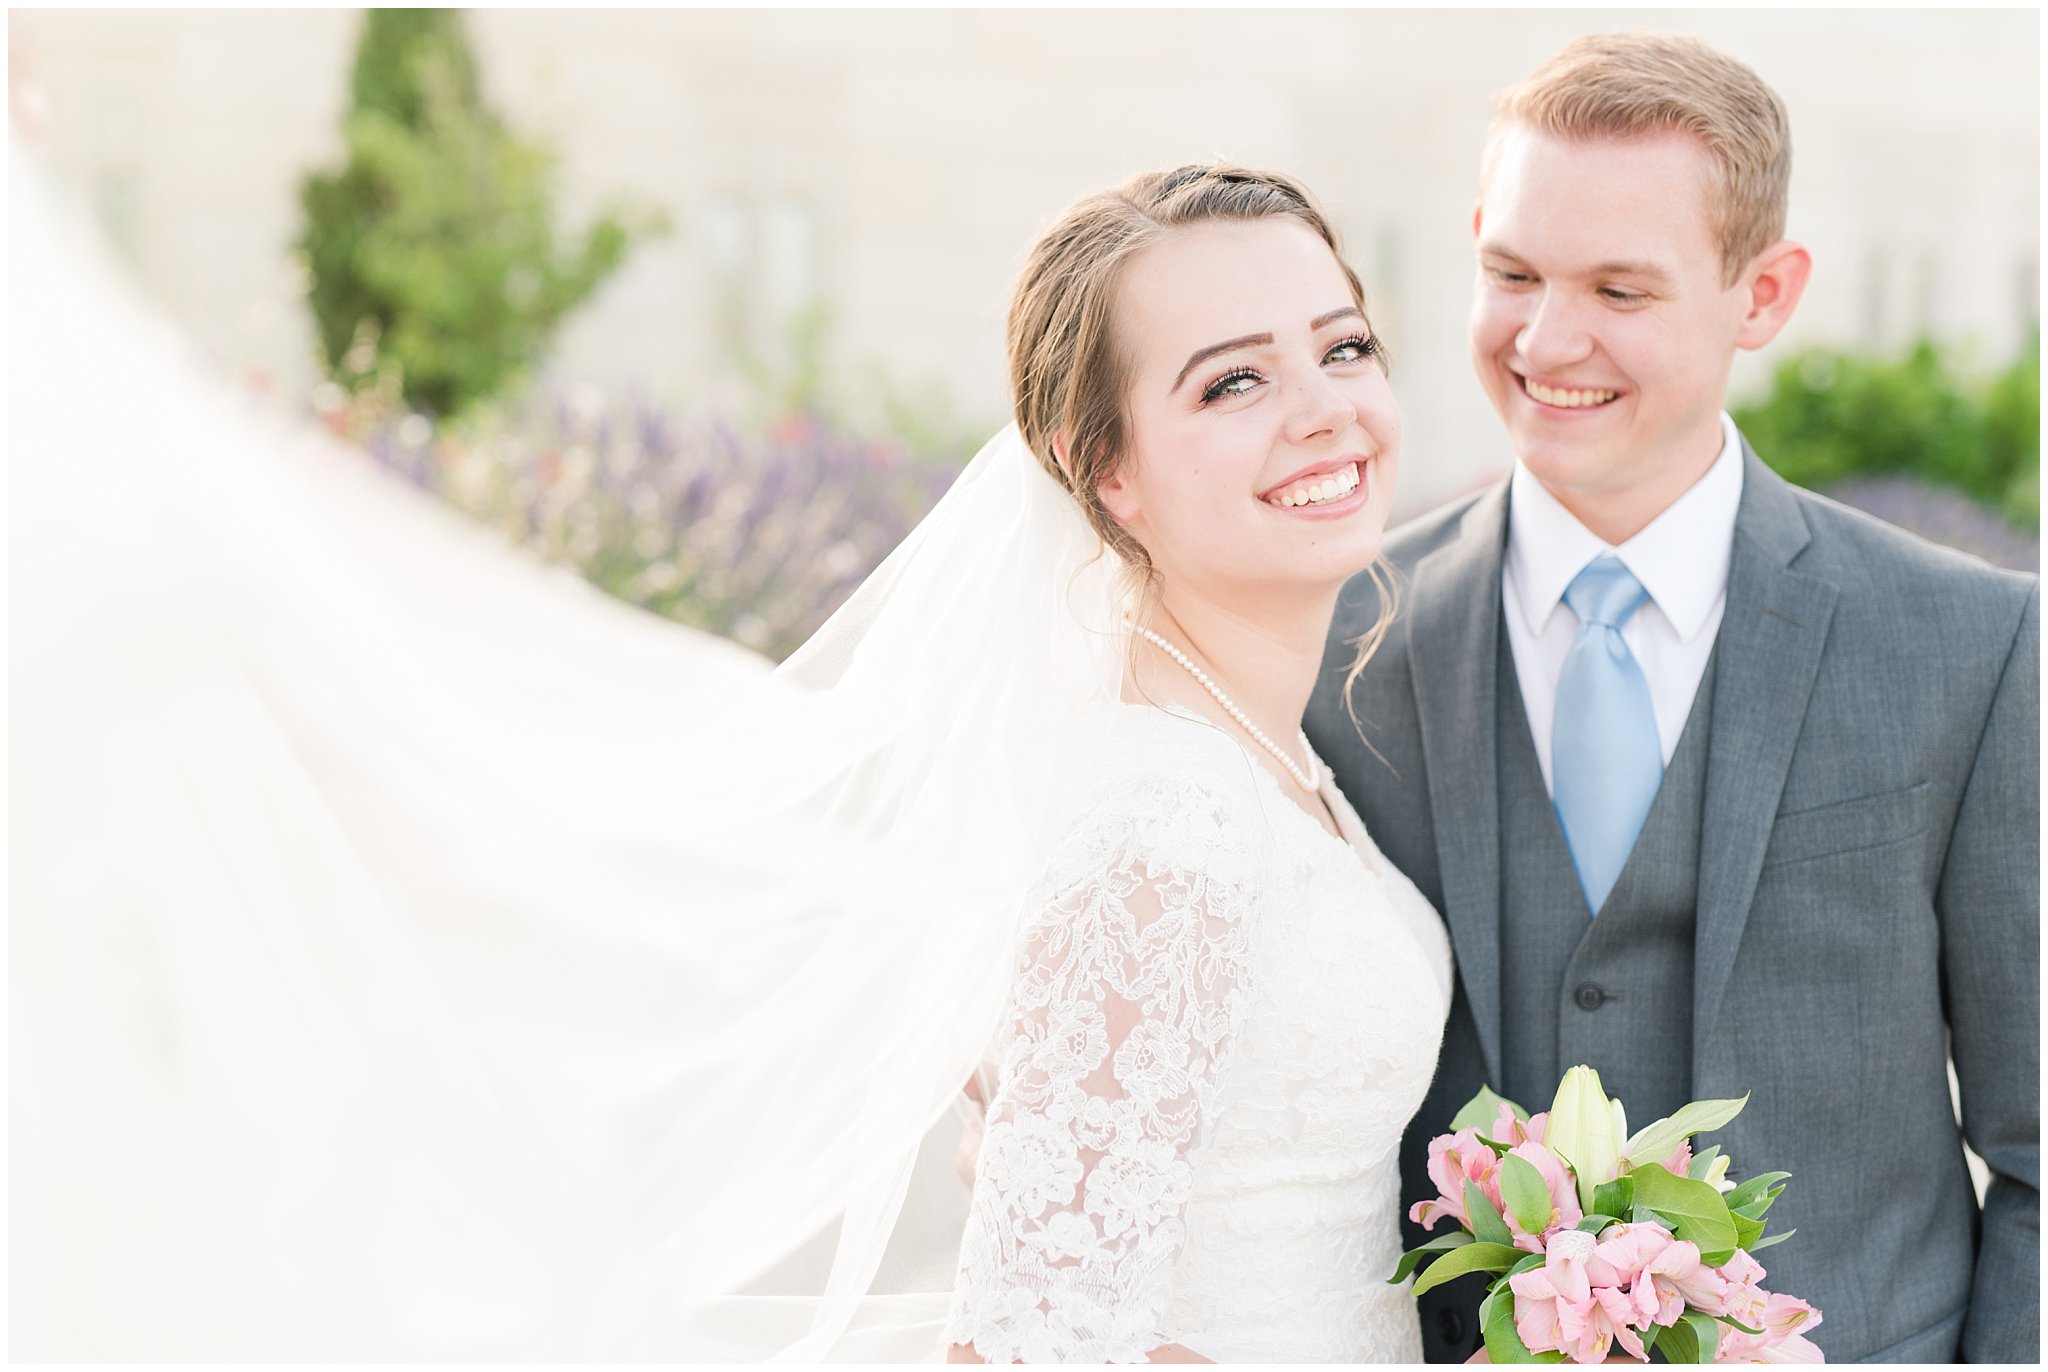 Bride with lace wedding dress and veil and groom wearing grey suit with light blue tie | bride and groom portraits | Ogden Temple Summer Wedding | Jessie and Dallin Photography